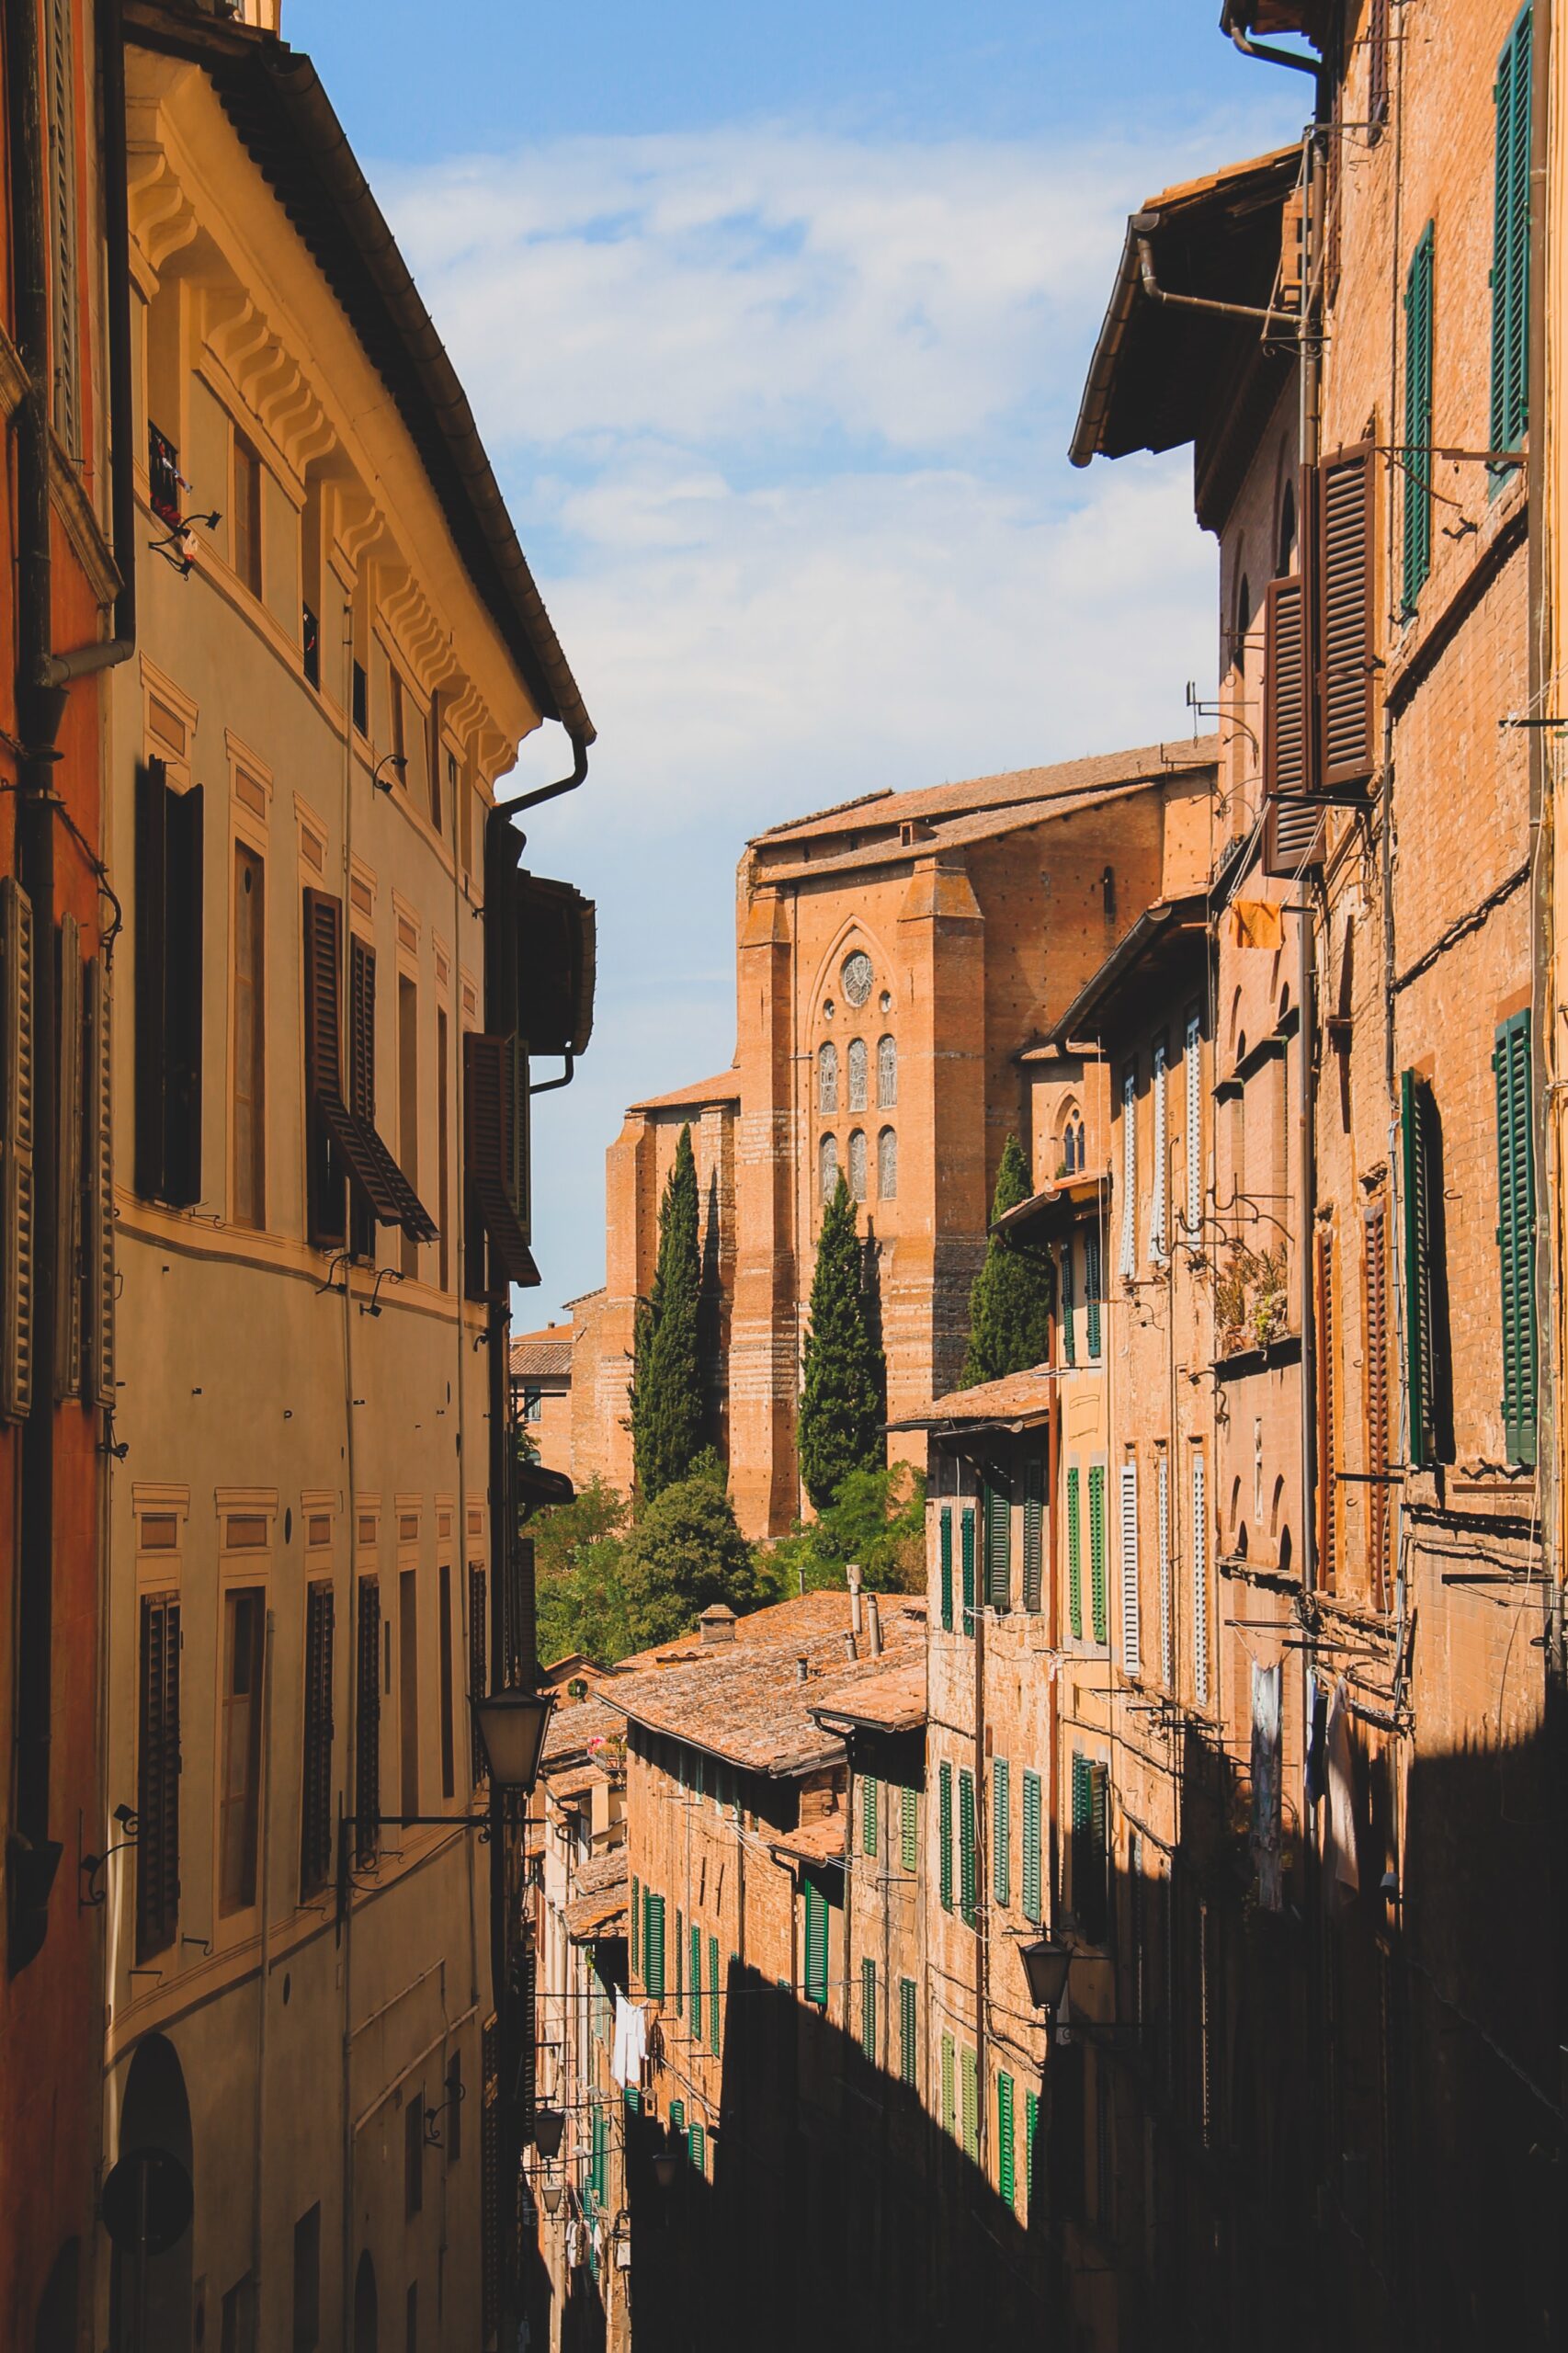 narrow alleyway with view of buildings and church in siena